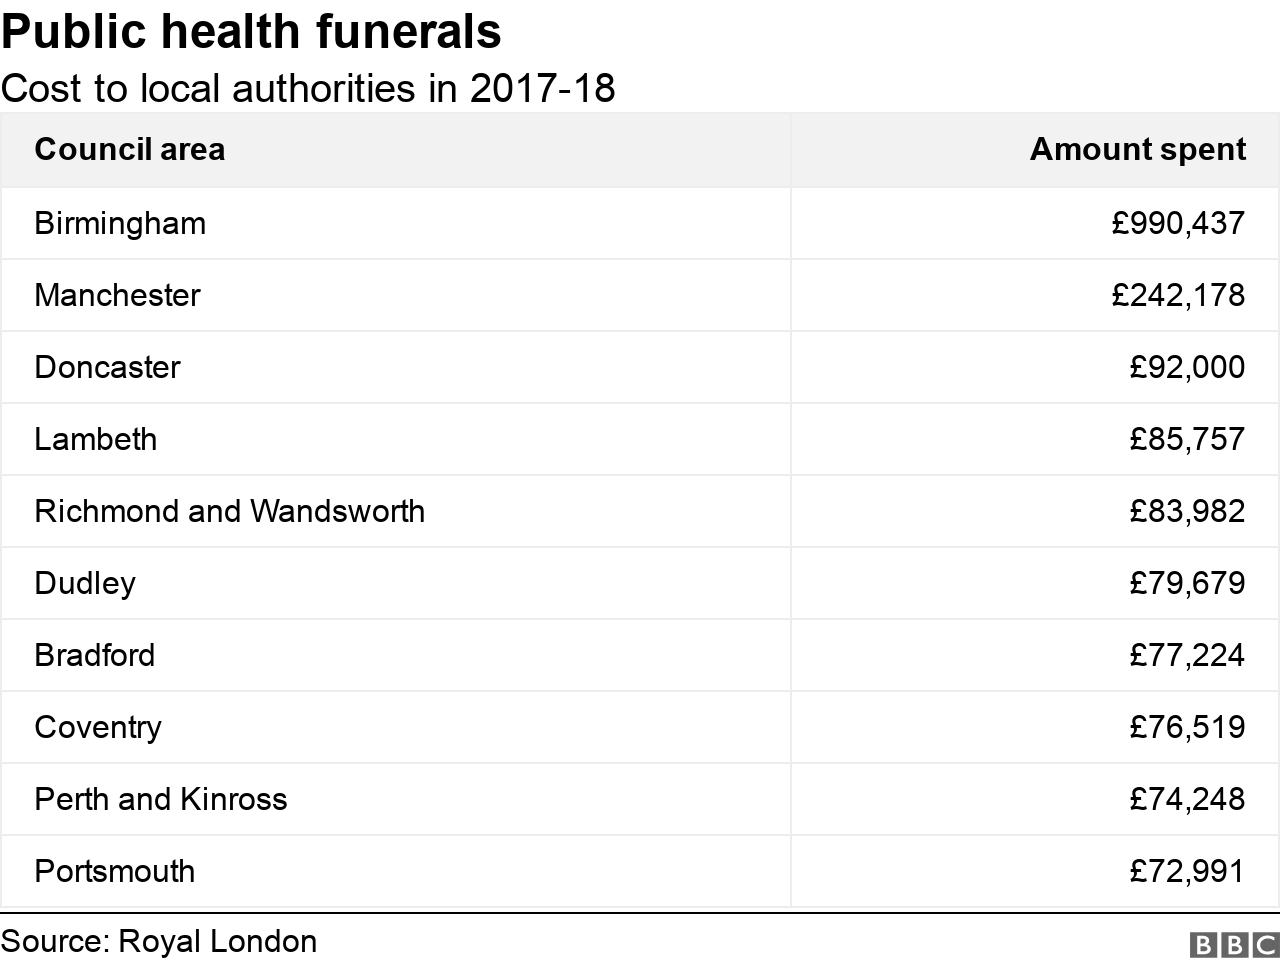 Chart showing cost of public health funerals to councils